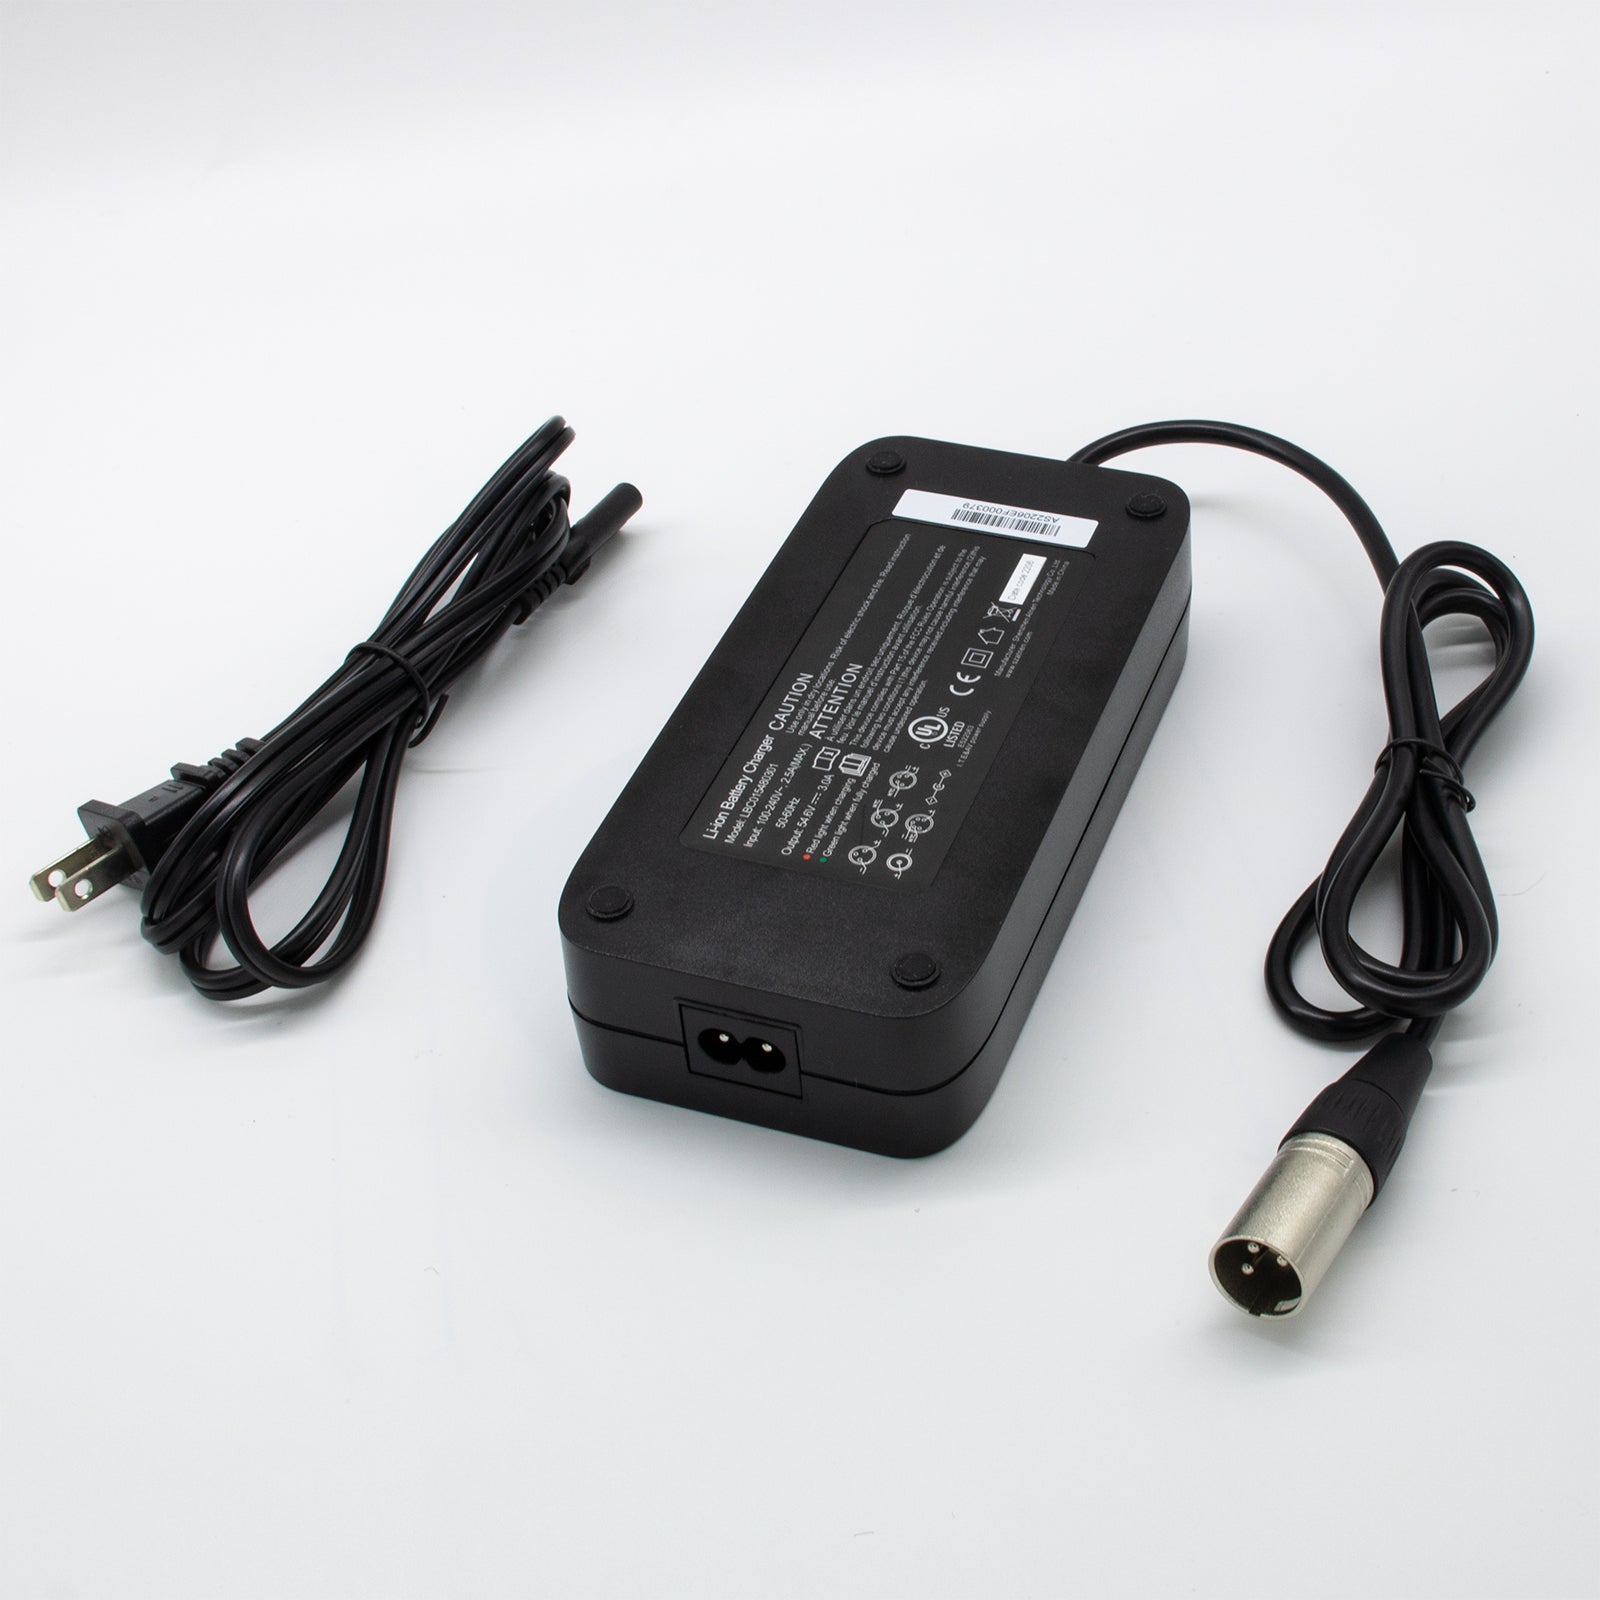 Battery Charger for 250W Systems